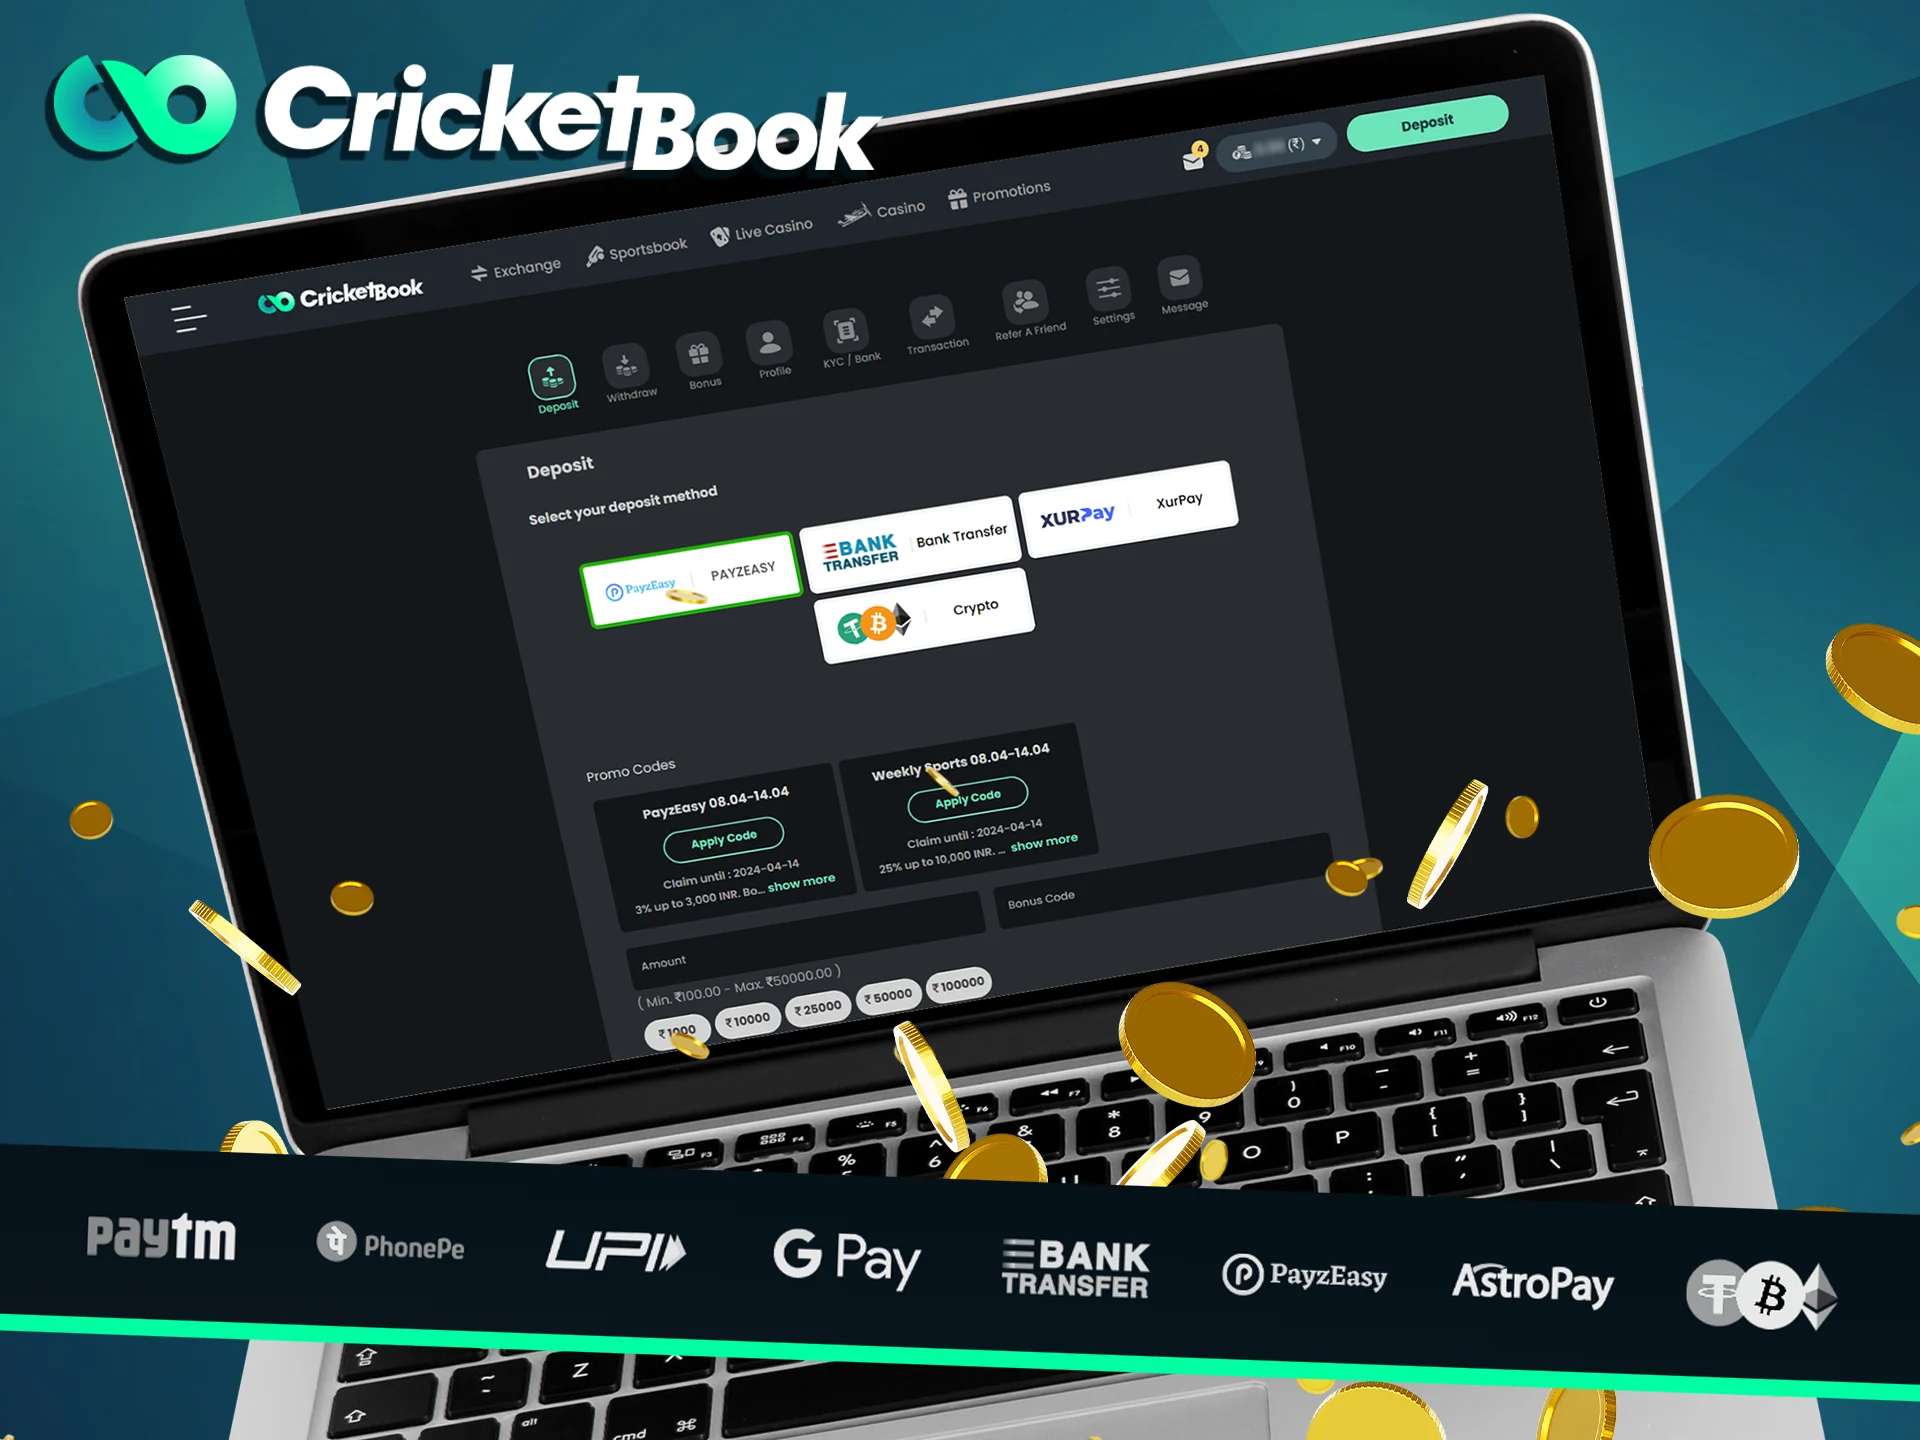 There are several types of payment options available at CricketBook India.